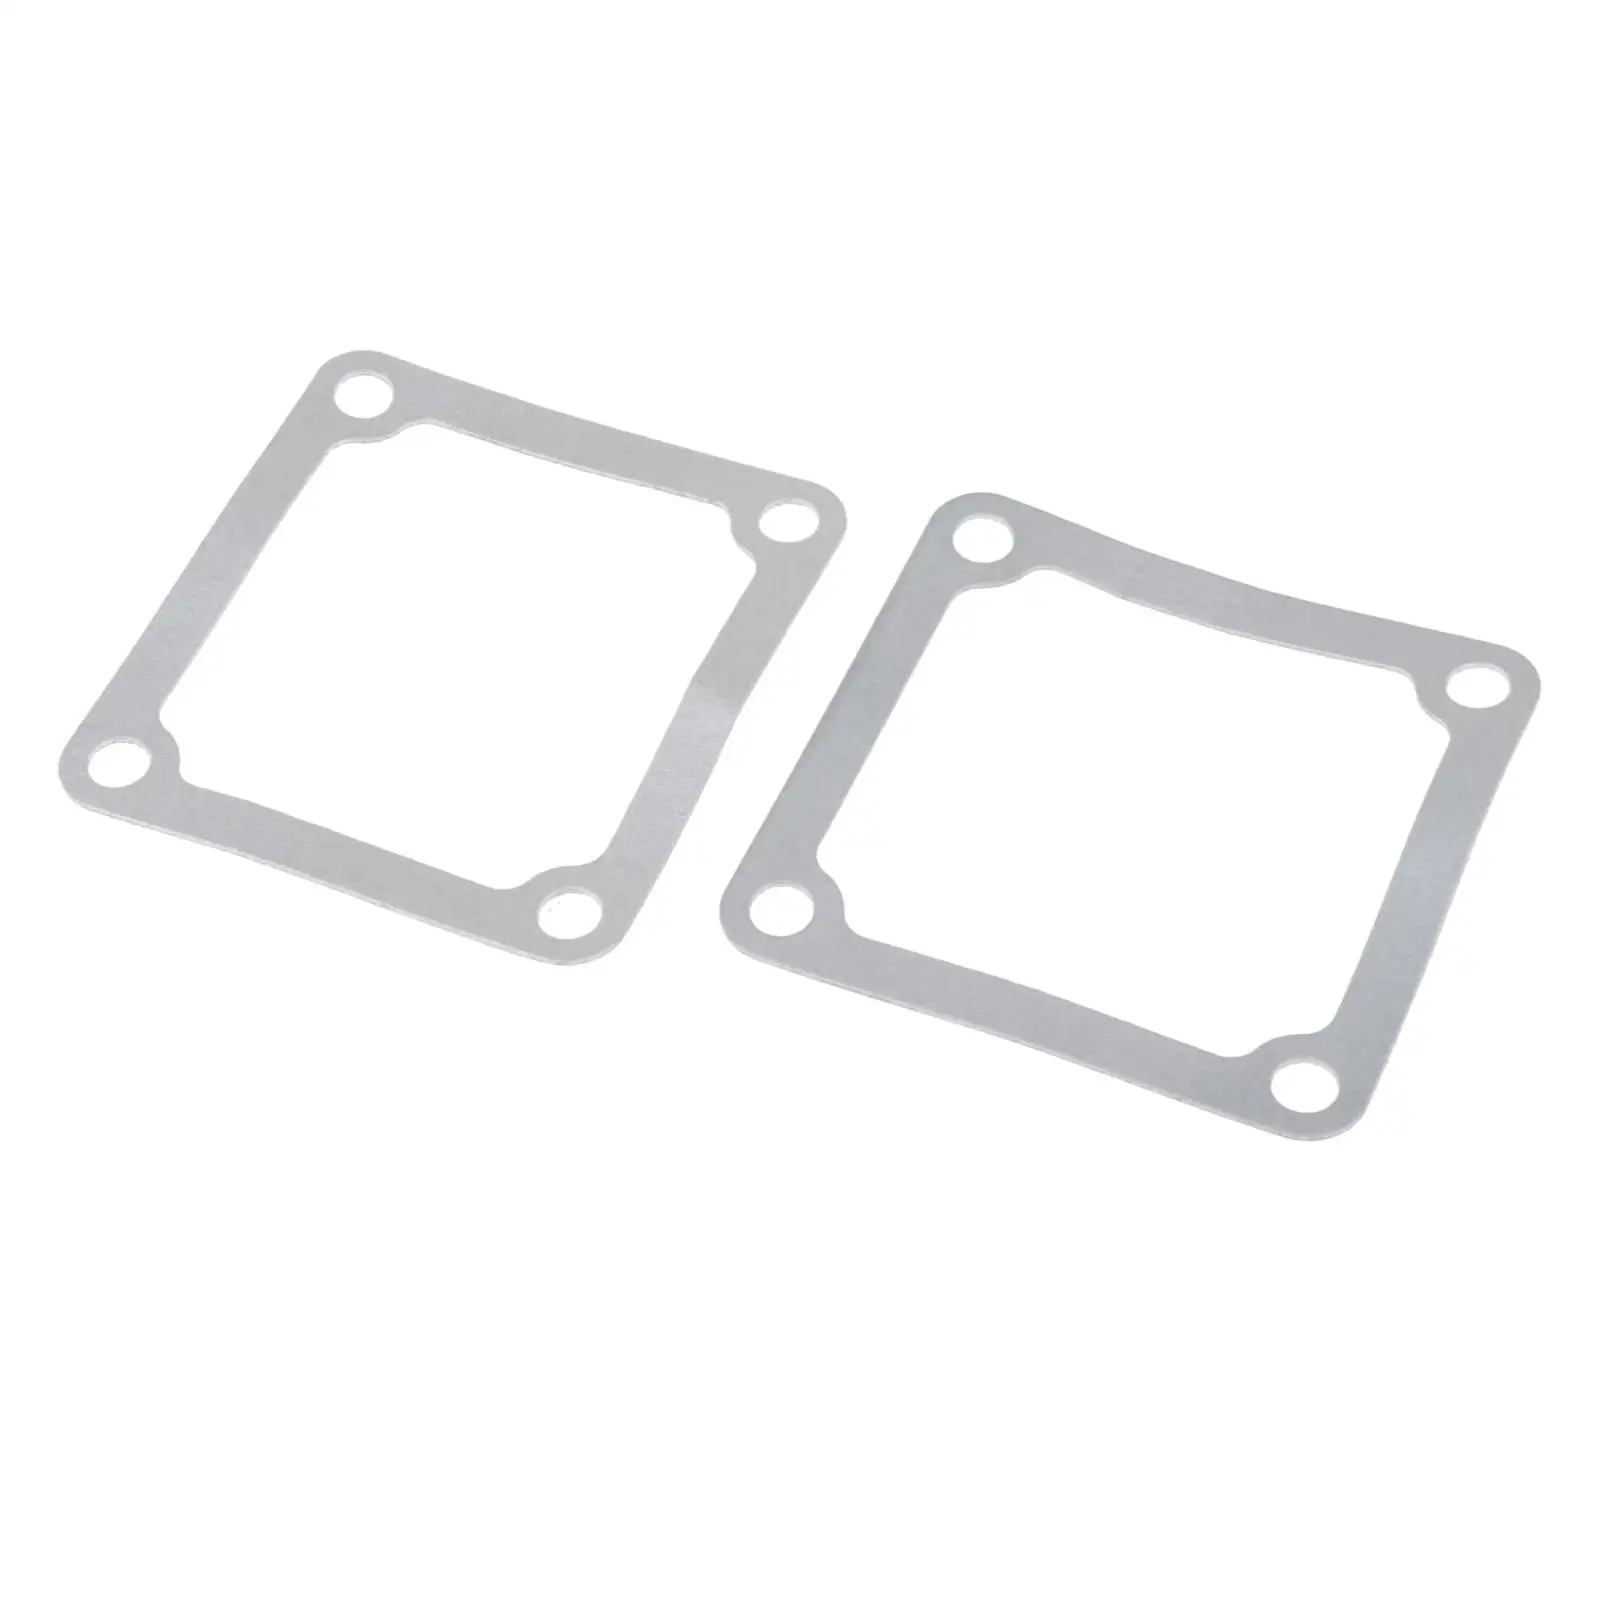 2Pcs Intake Heater Grid Gaskets for 5.9L Vehicle Strong Sealing Accessory 89-07 Sturdy Auto Parts Paper